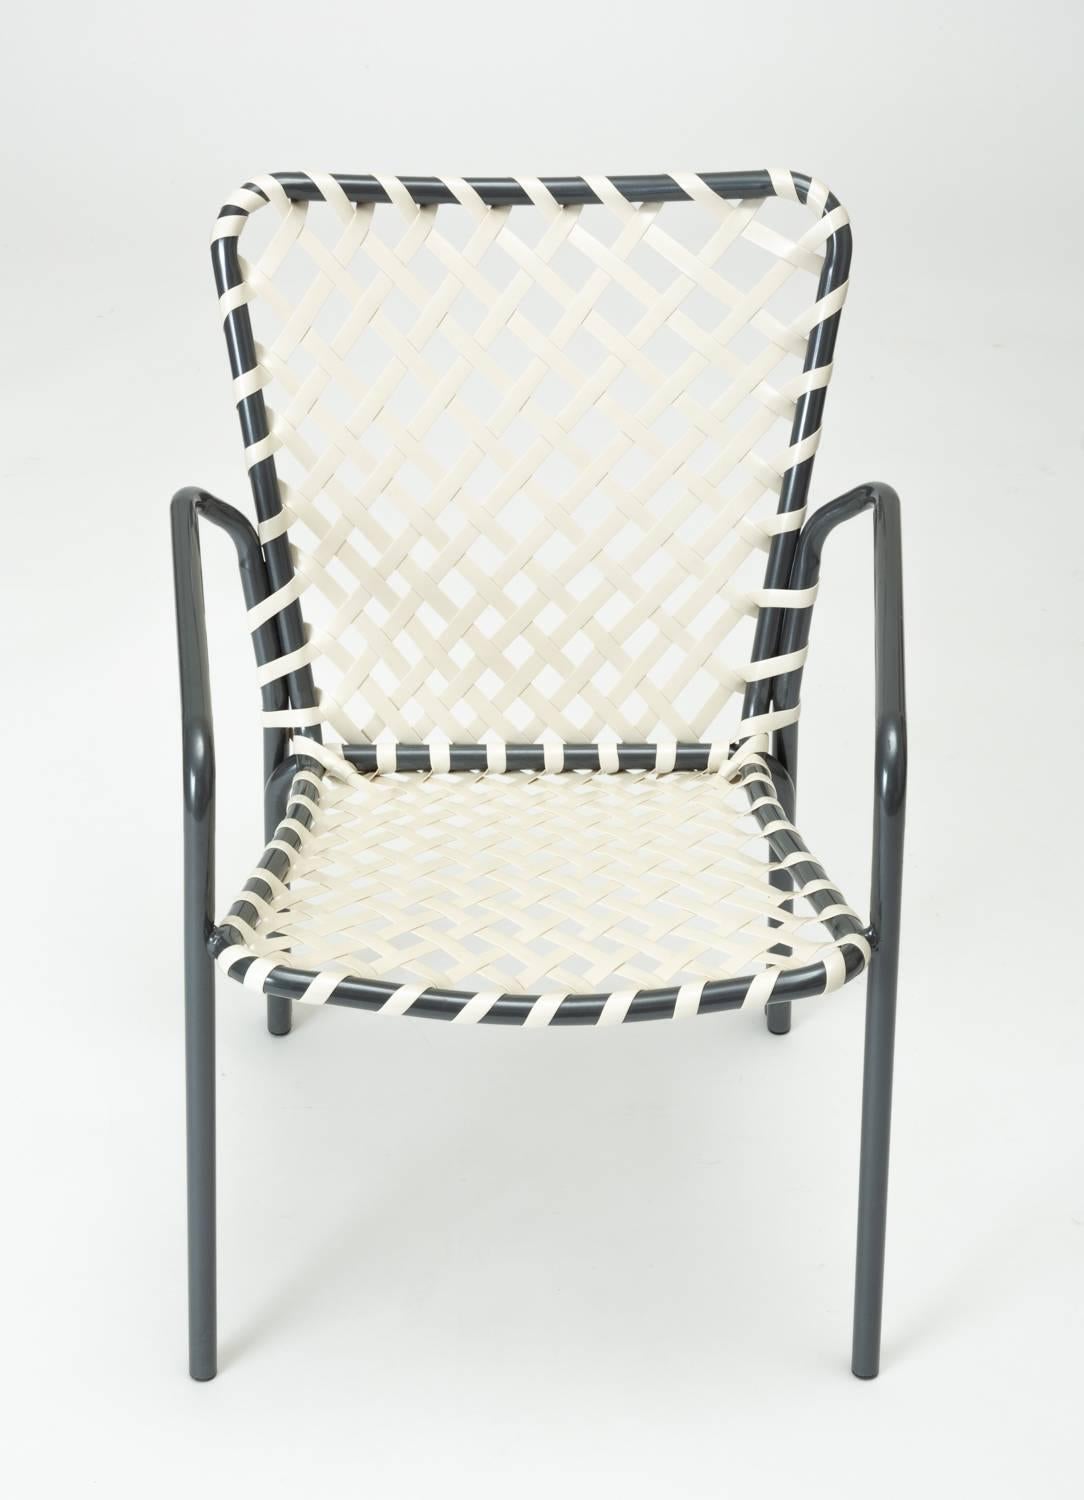 A set of eight patio dining chairs from the Ames Aire patio collection by the O. Ames Company of West Virginia. With a lightweight frame in aluminium, the chairs have a slight tulip back and curved arms. Tightly woven white vinyl lacing forms the